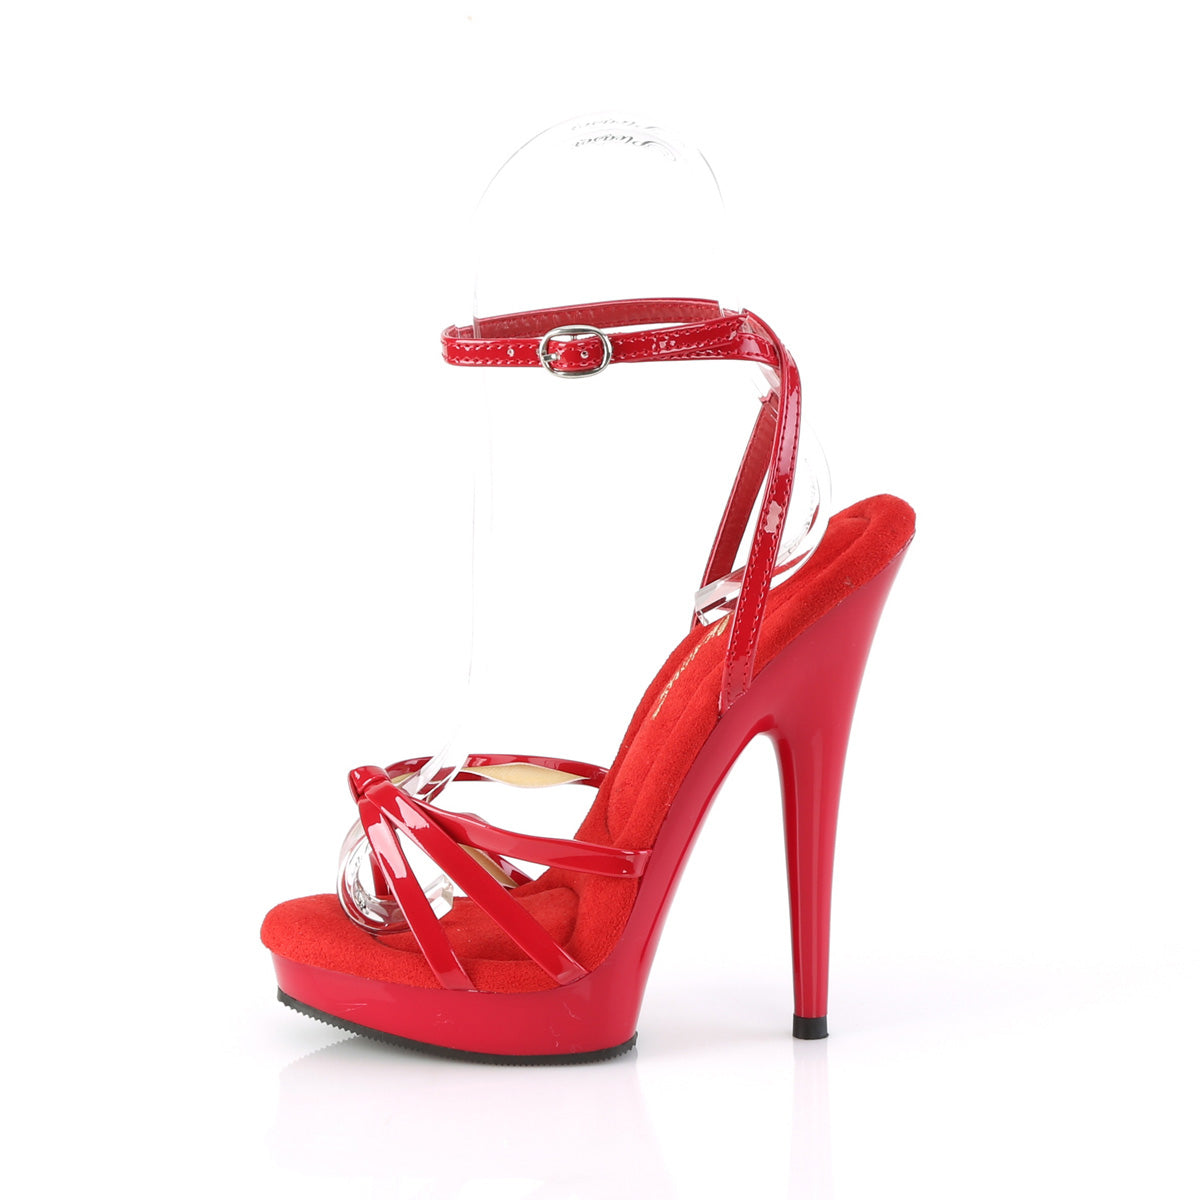 FABULICIOUS SULTRY-638 RED 6 INCH HIGH HEEL SHOES SIZE 7 USA SALE